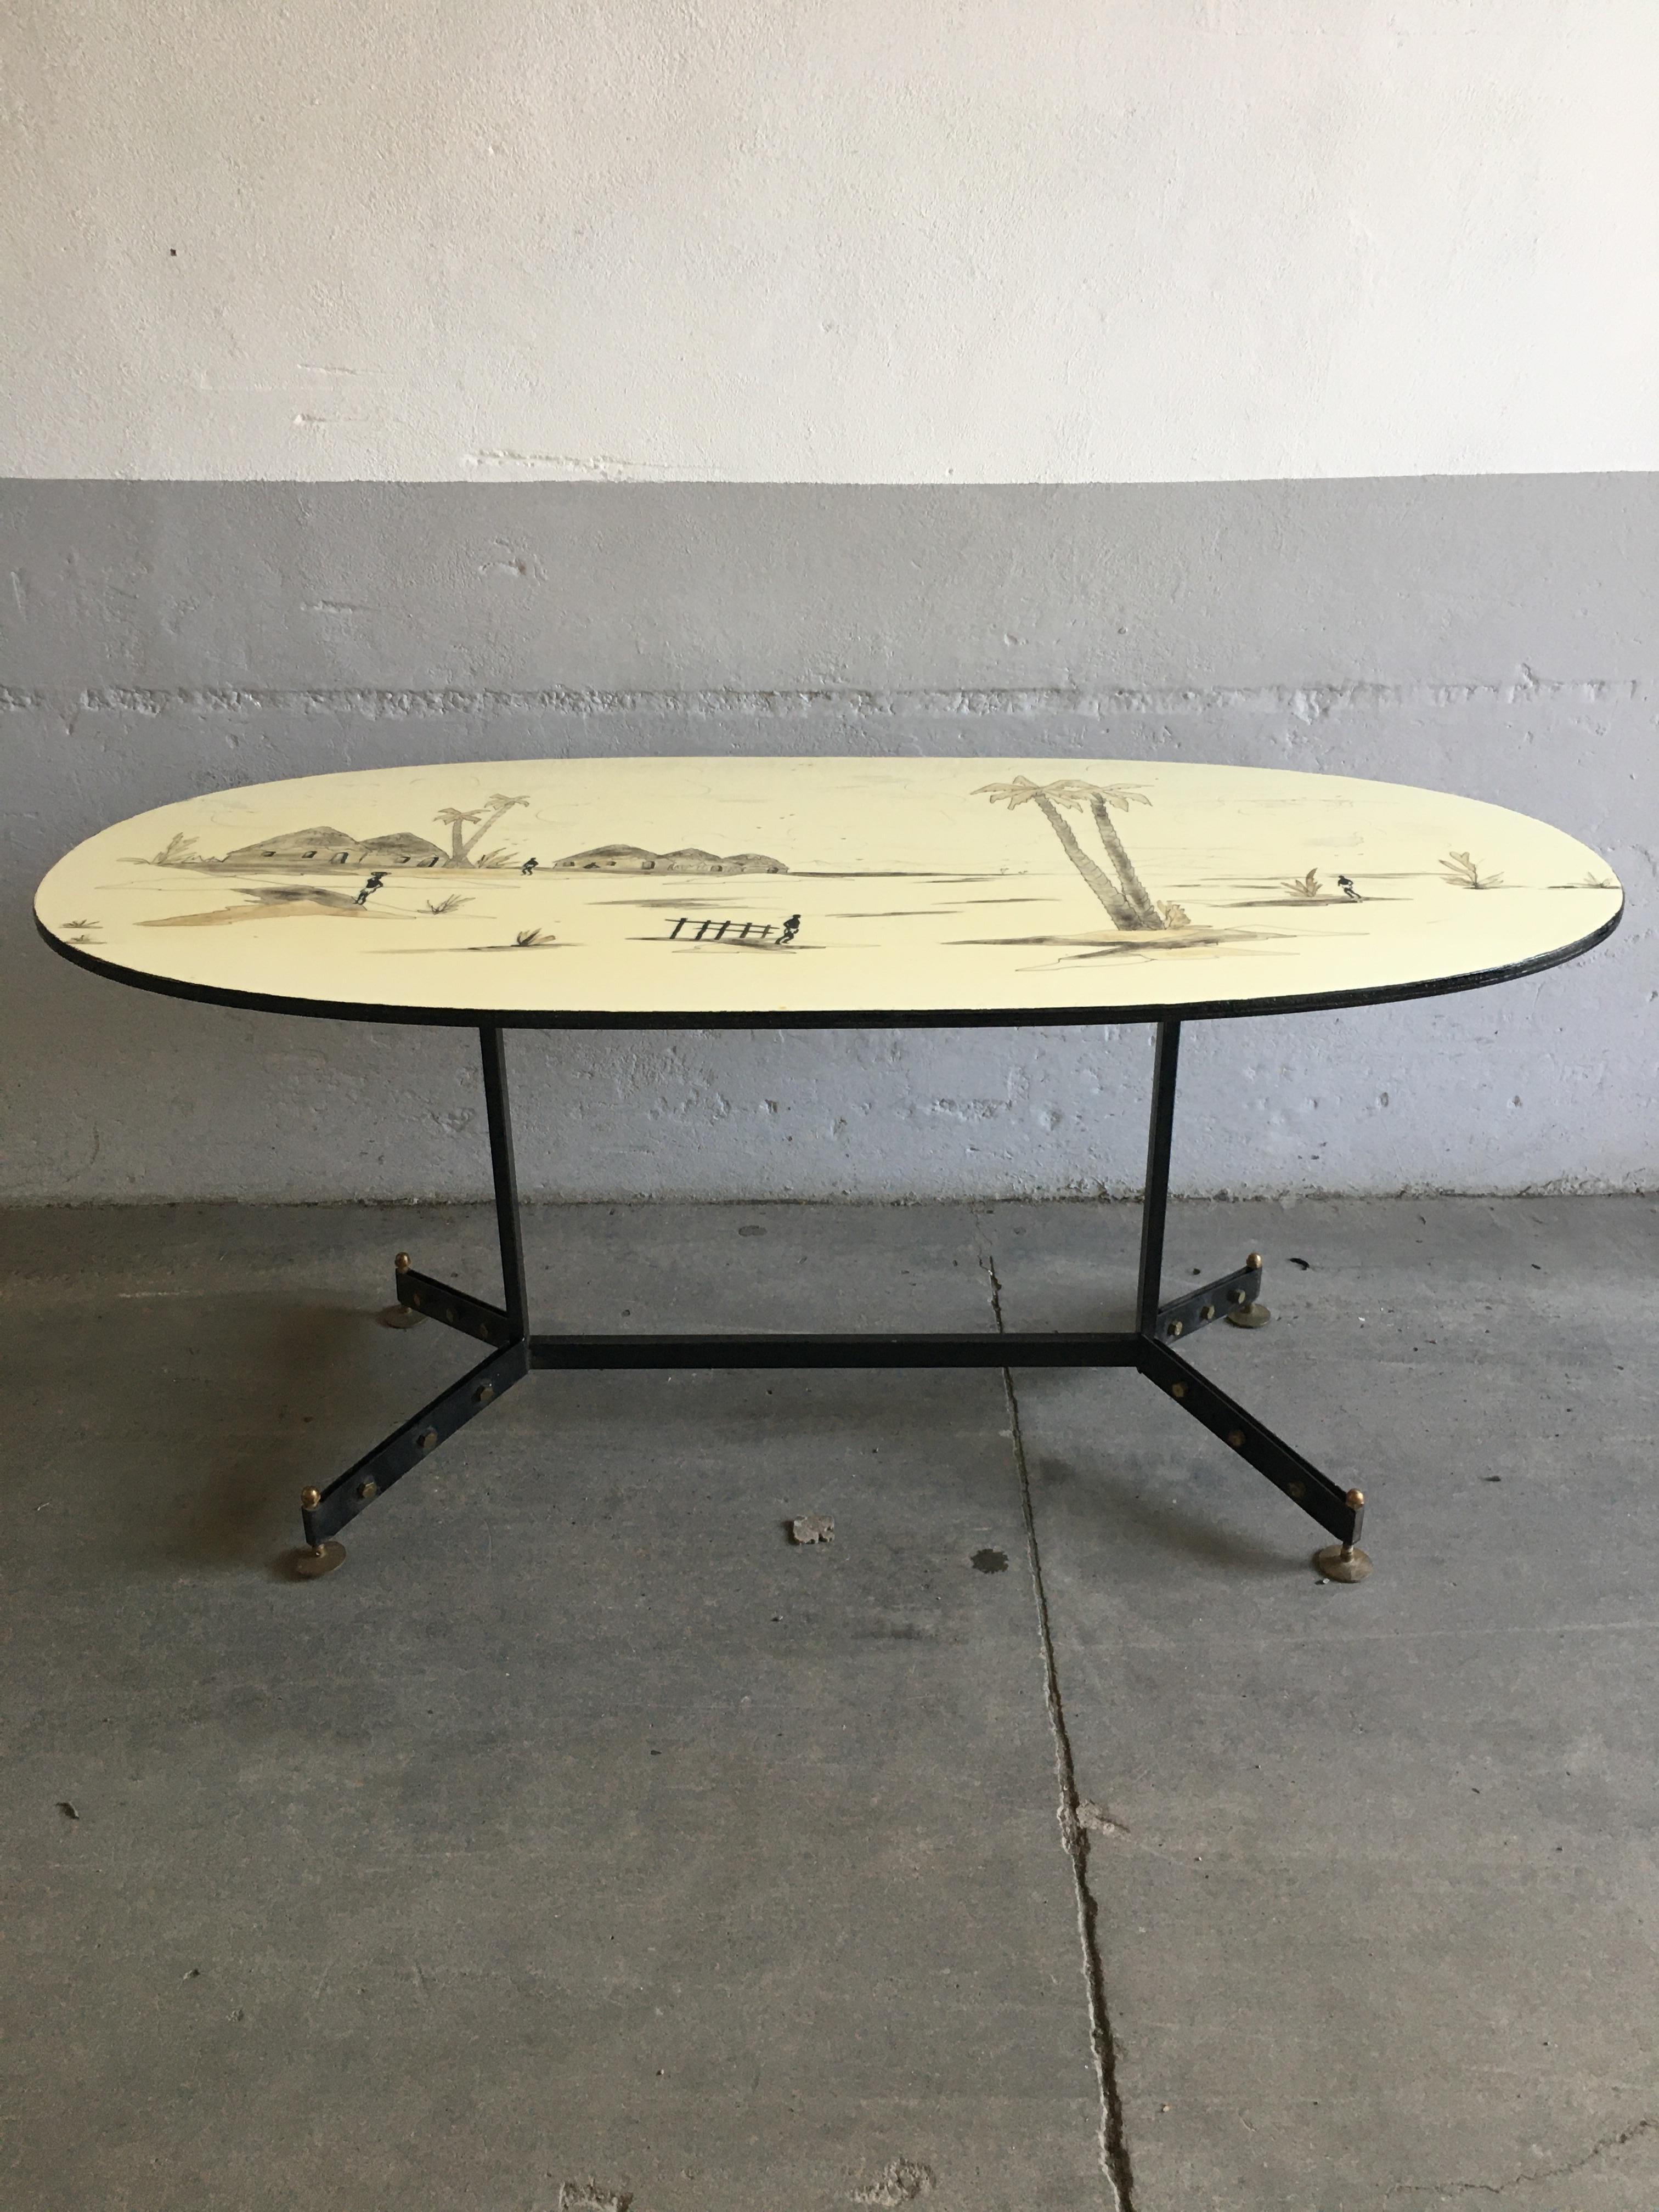 Glazed Mid-Century Modern French Dining Table with African Landscape Decorations, 1960s For Sale